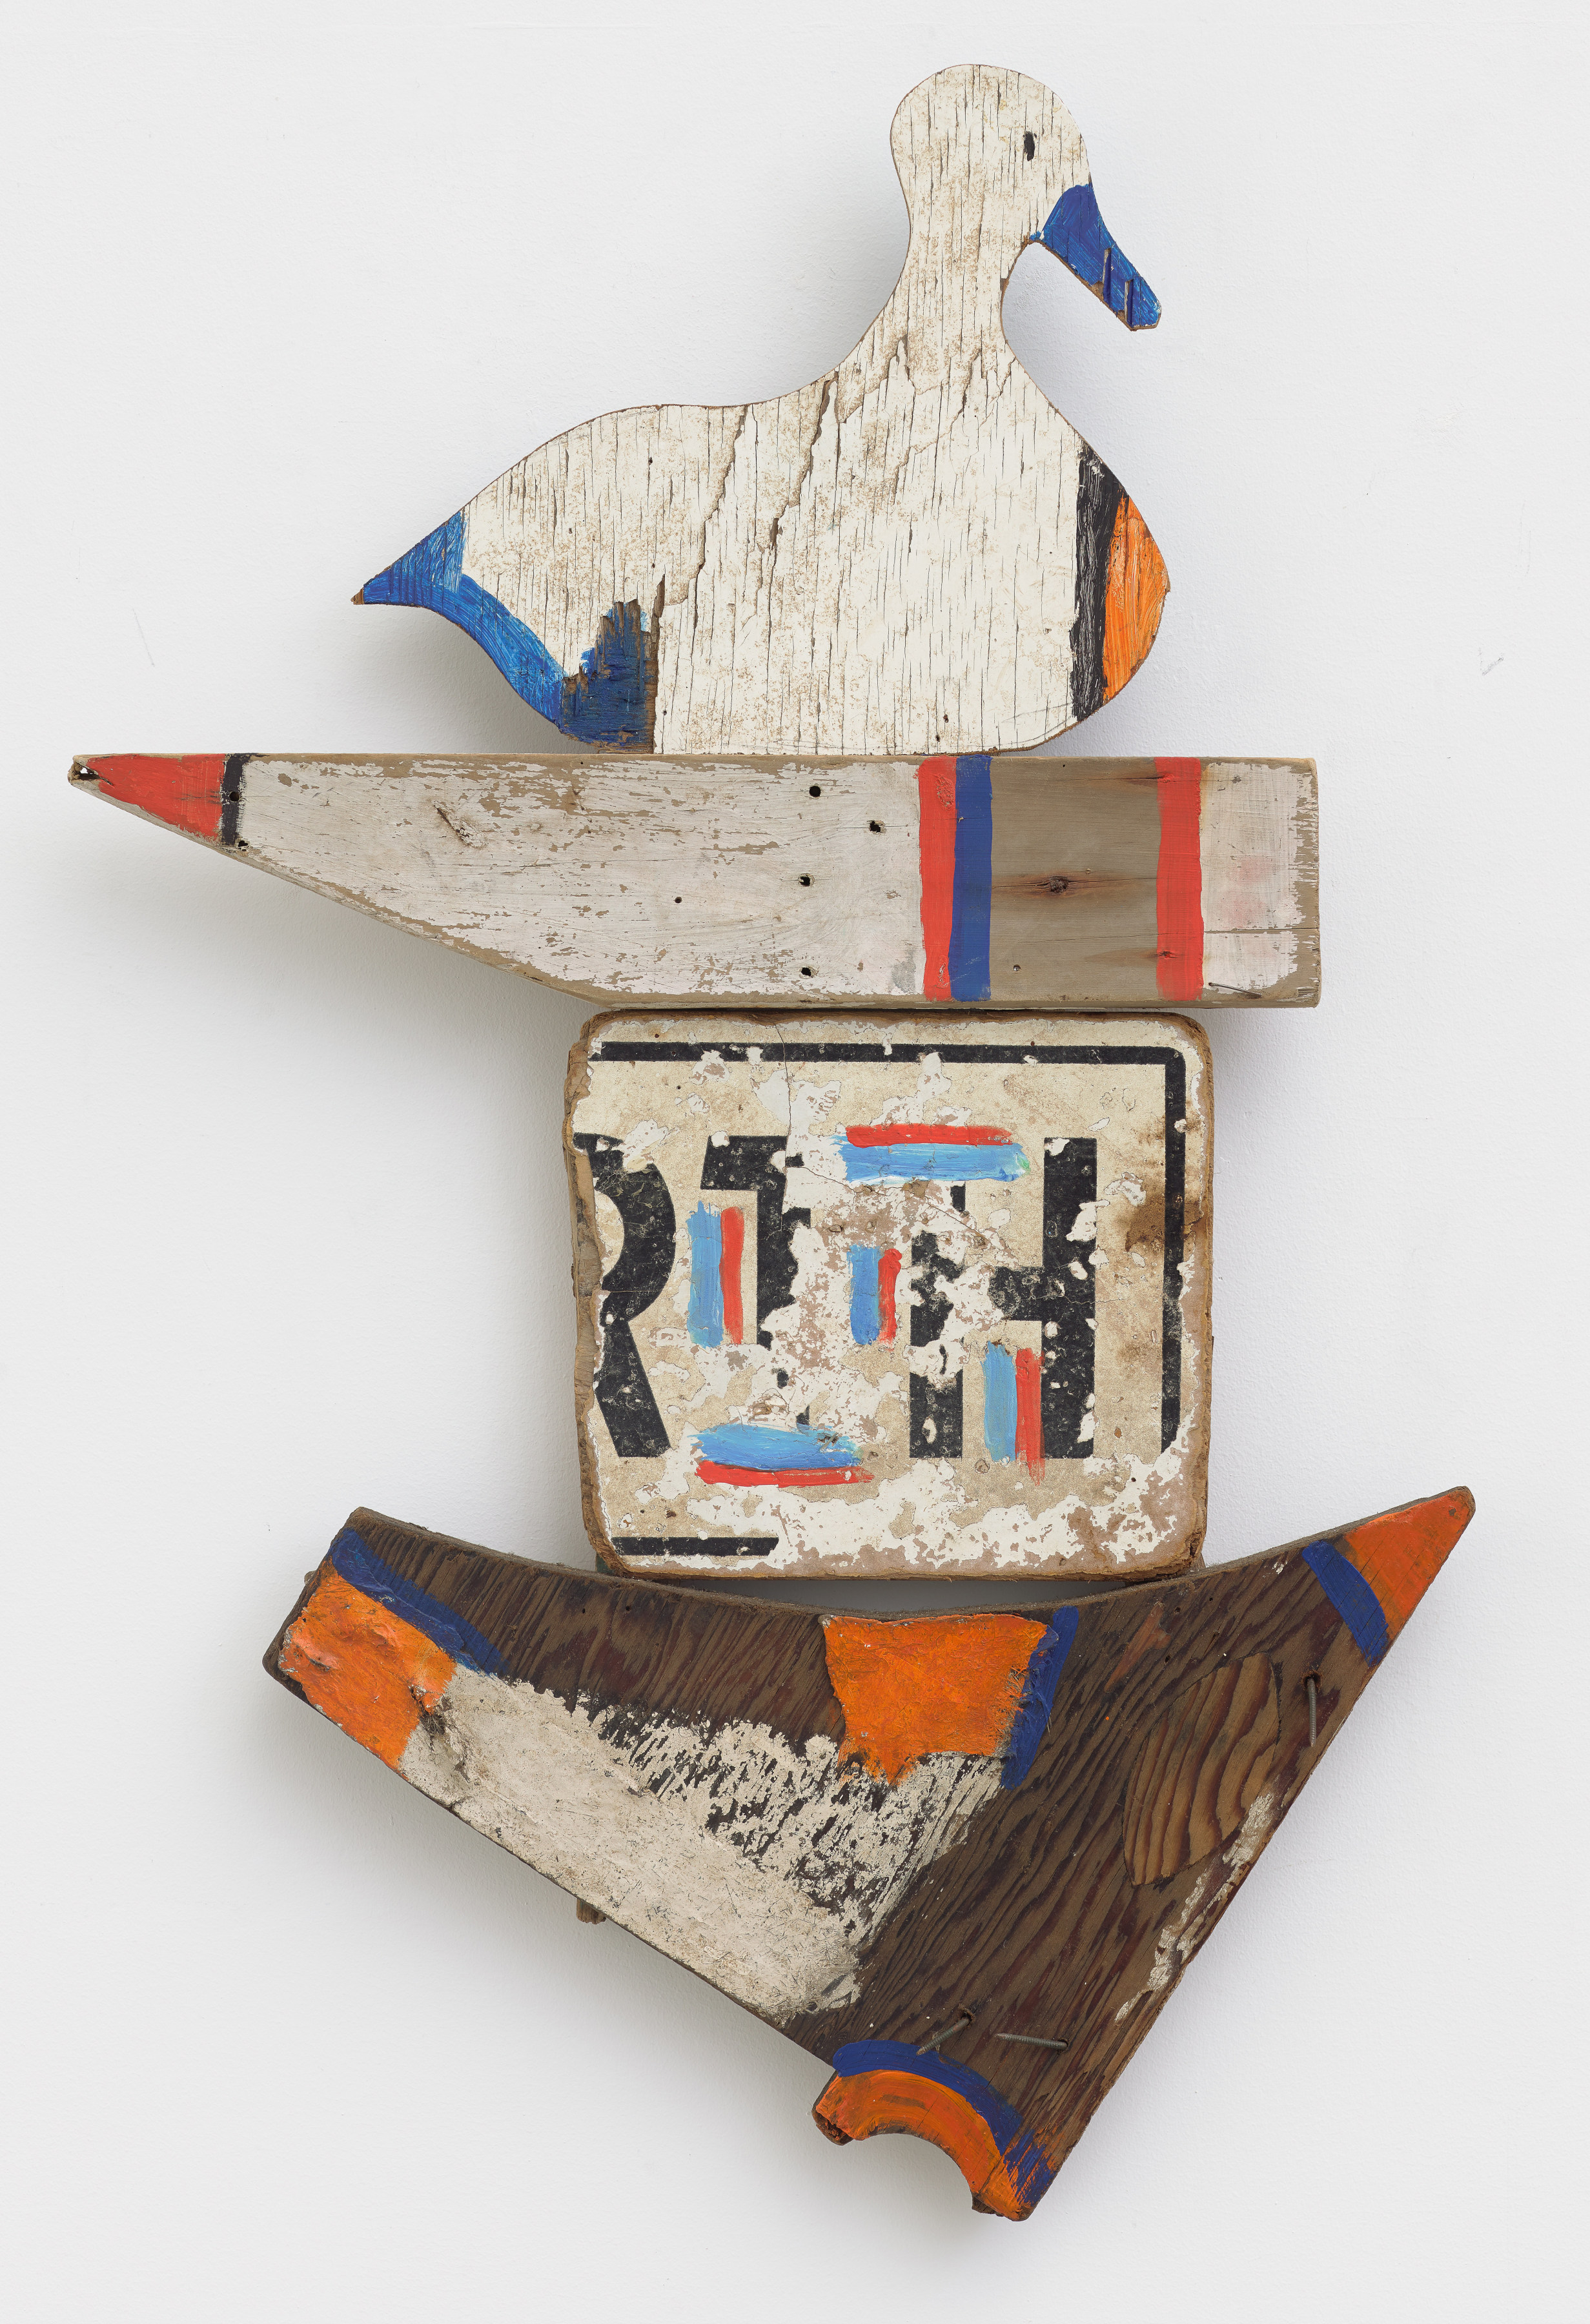 Flying Duck, 1981, Wood, paint, and hardware